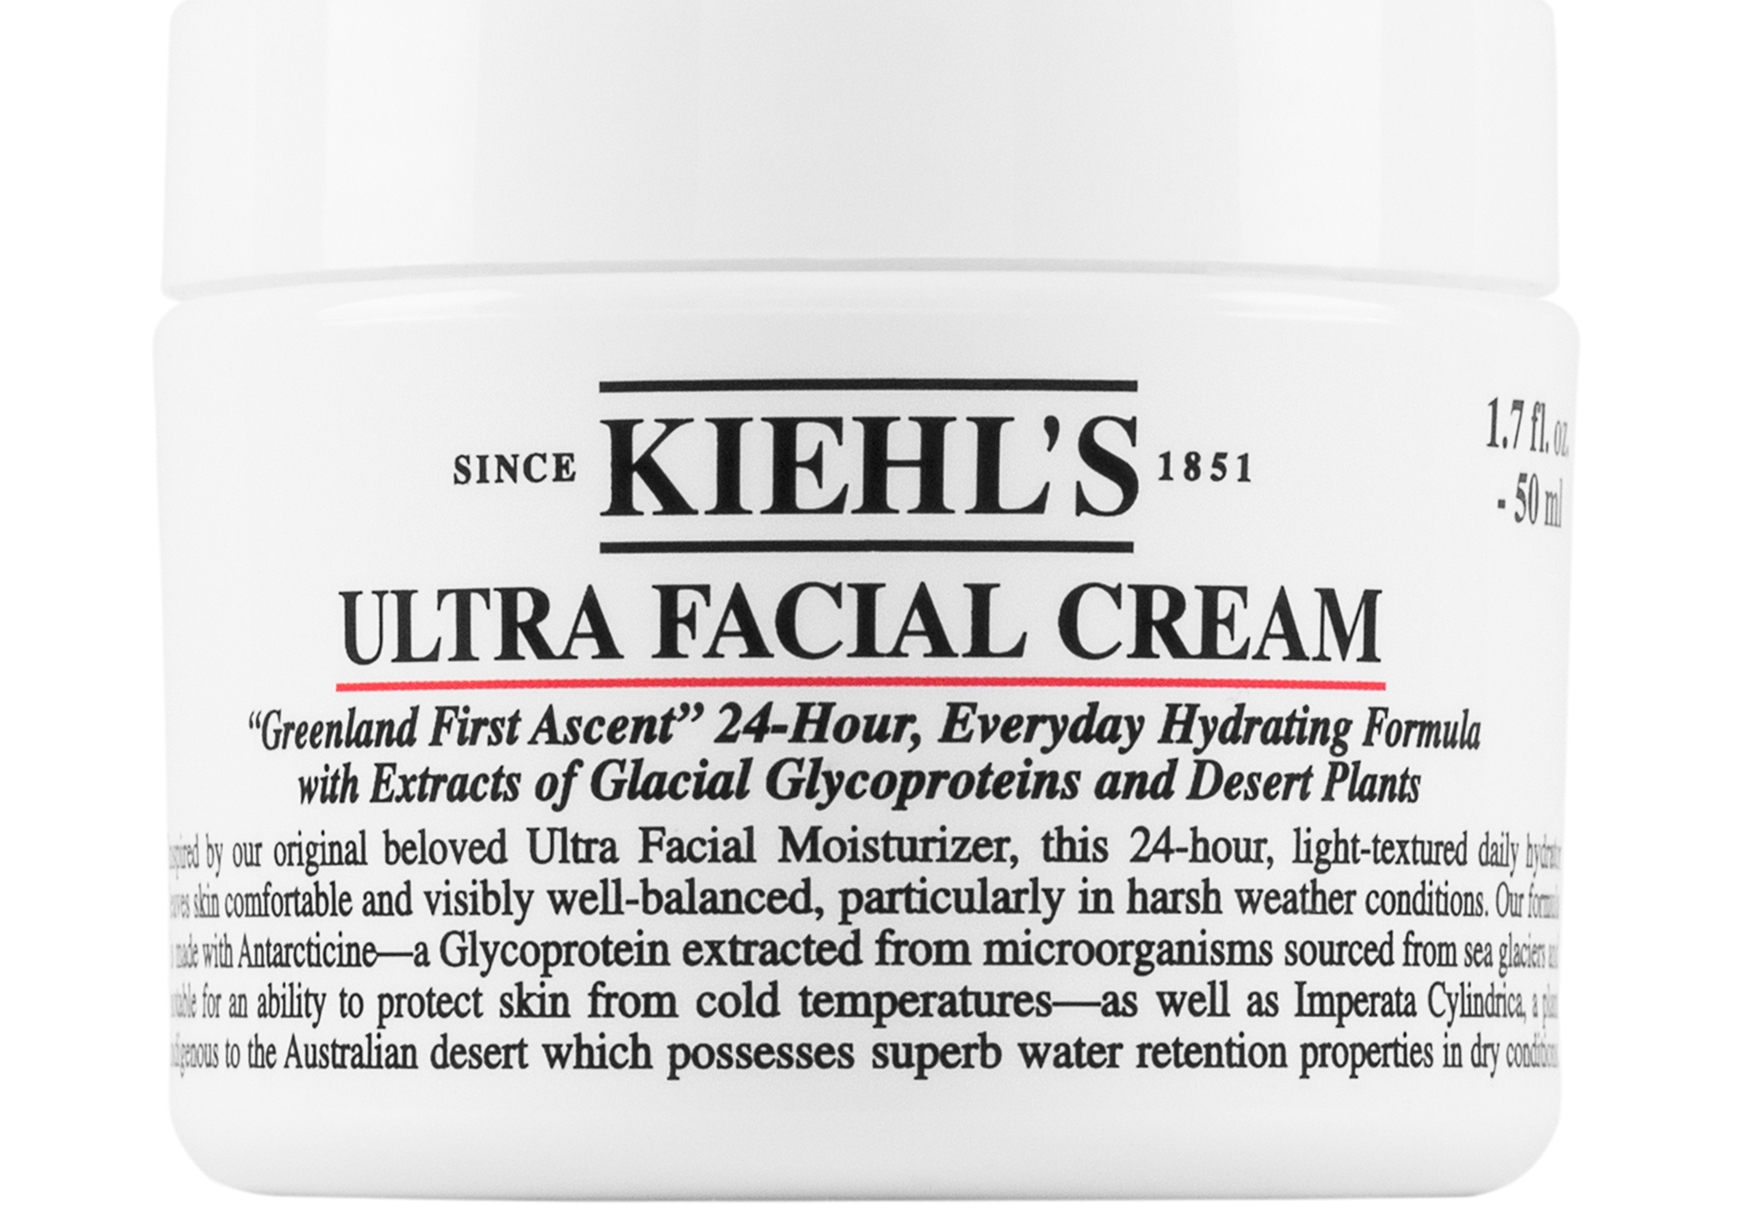 Kiehls Ultra Facial Cream - Top 15 Picks from Nykaa Luxe Store - Best Skin Care Products for Anti-Aging, Fairness & De-Tan